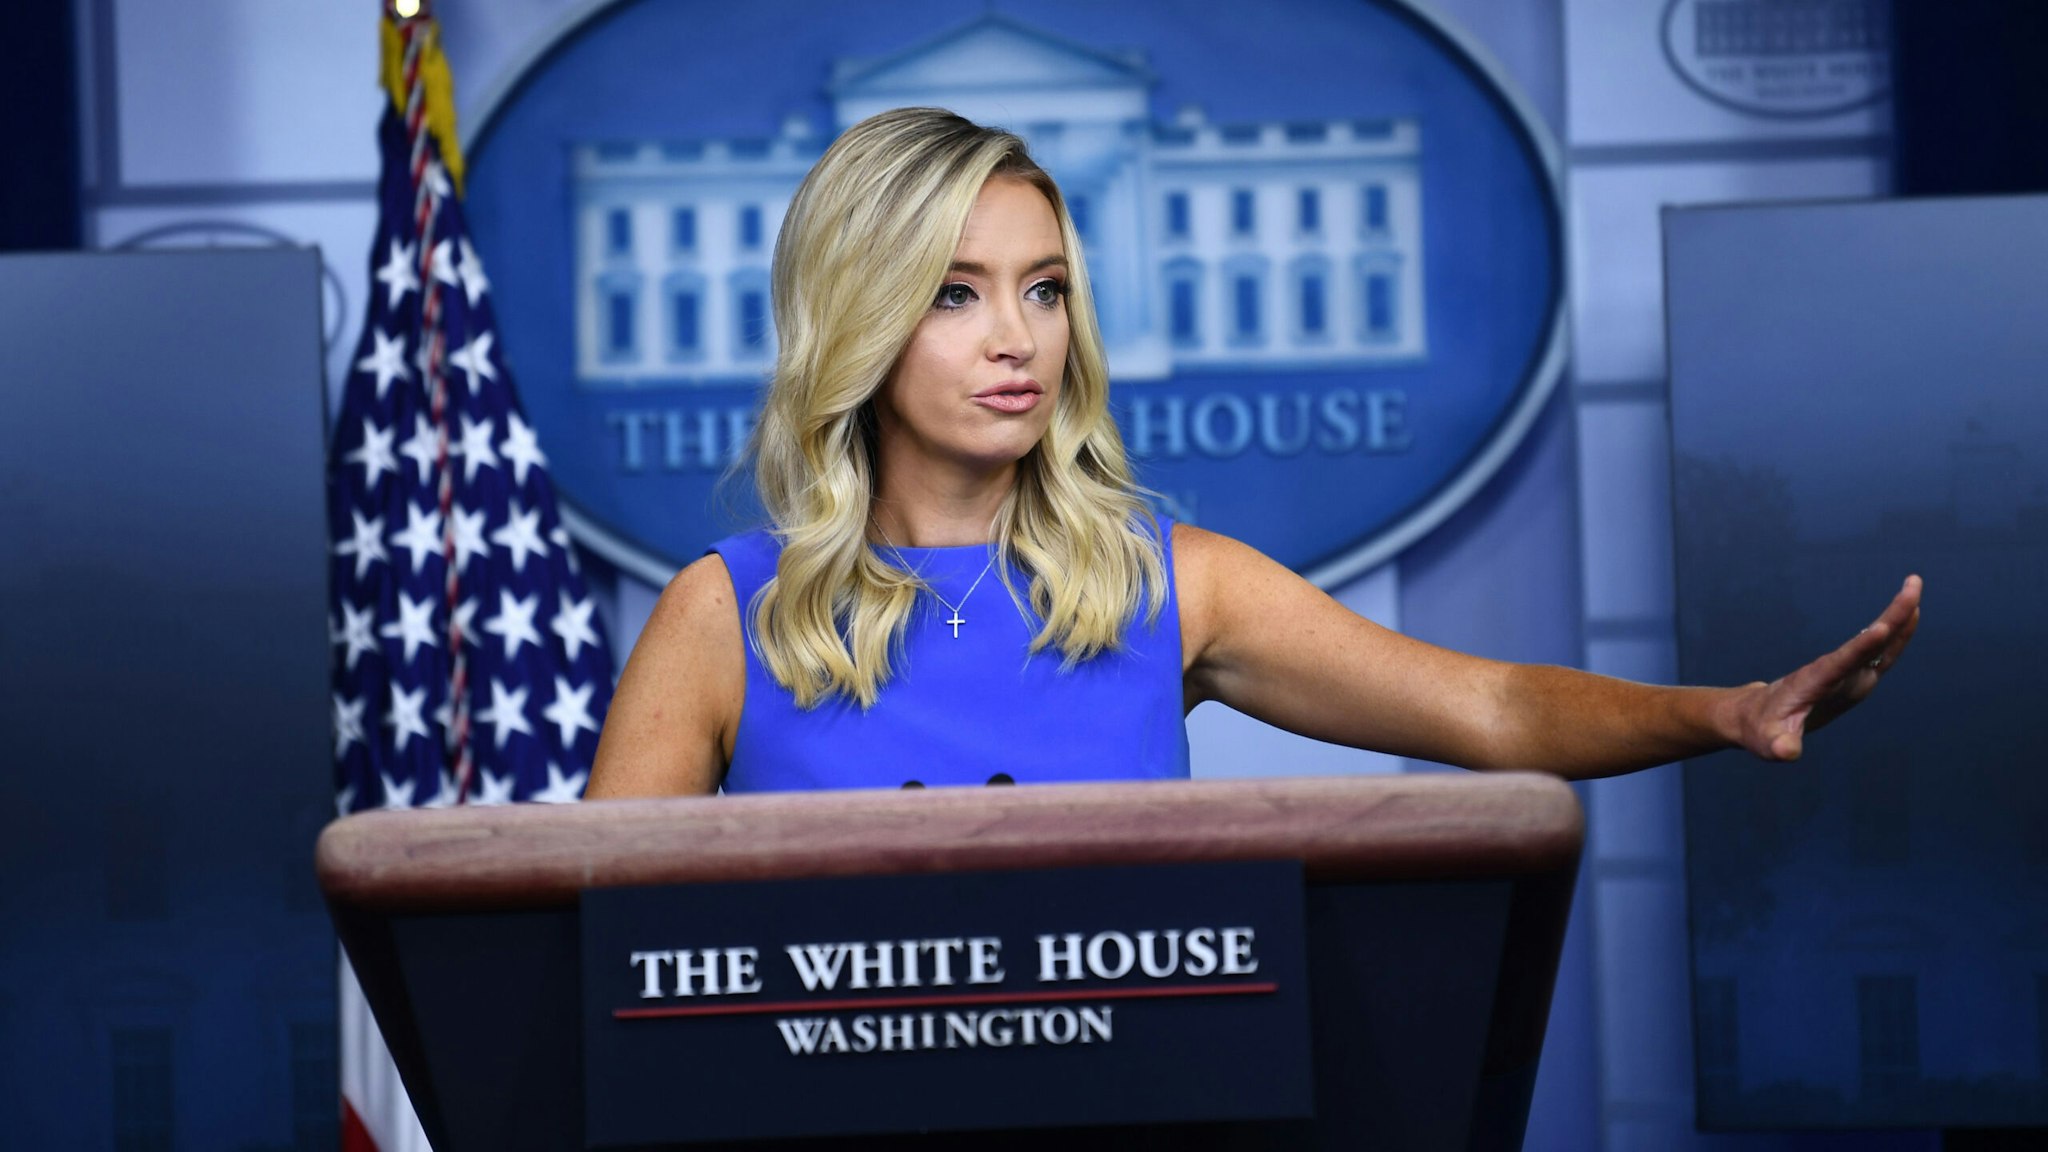 White House Press Secretary Kayleigh McEnany speaks during a press briefing in the James S. Brady Press Briefing Room at the White House, in Washington, DC on August 4, 2020.